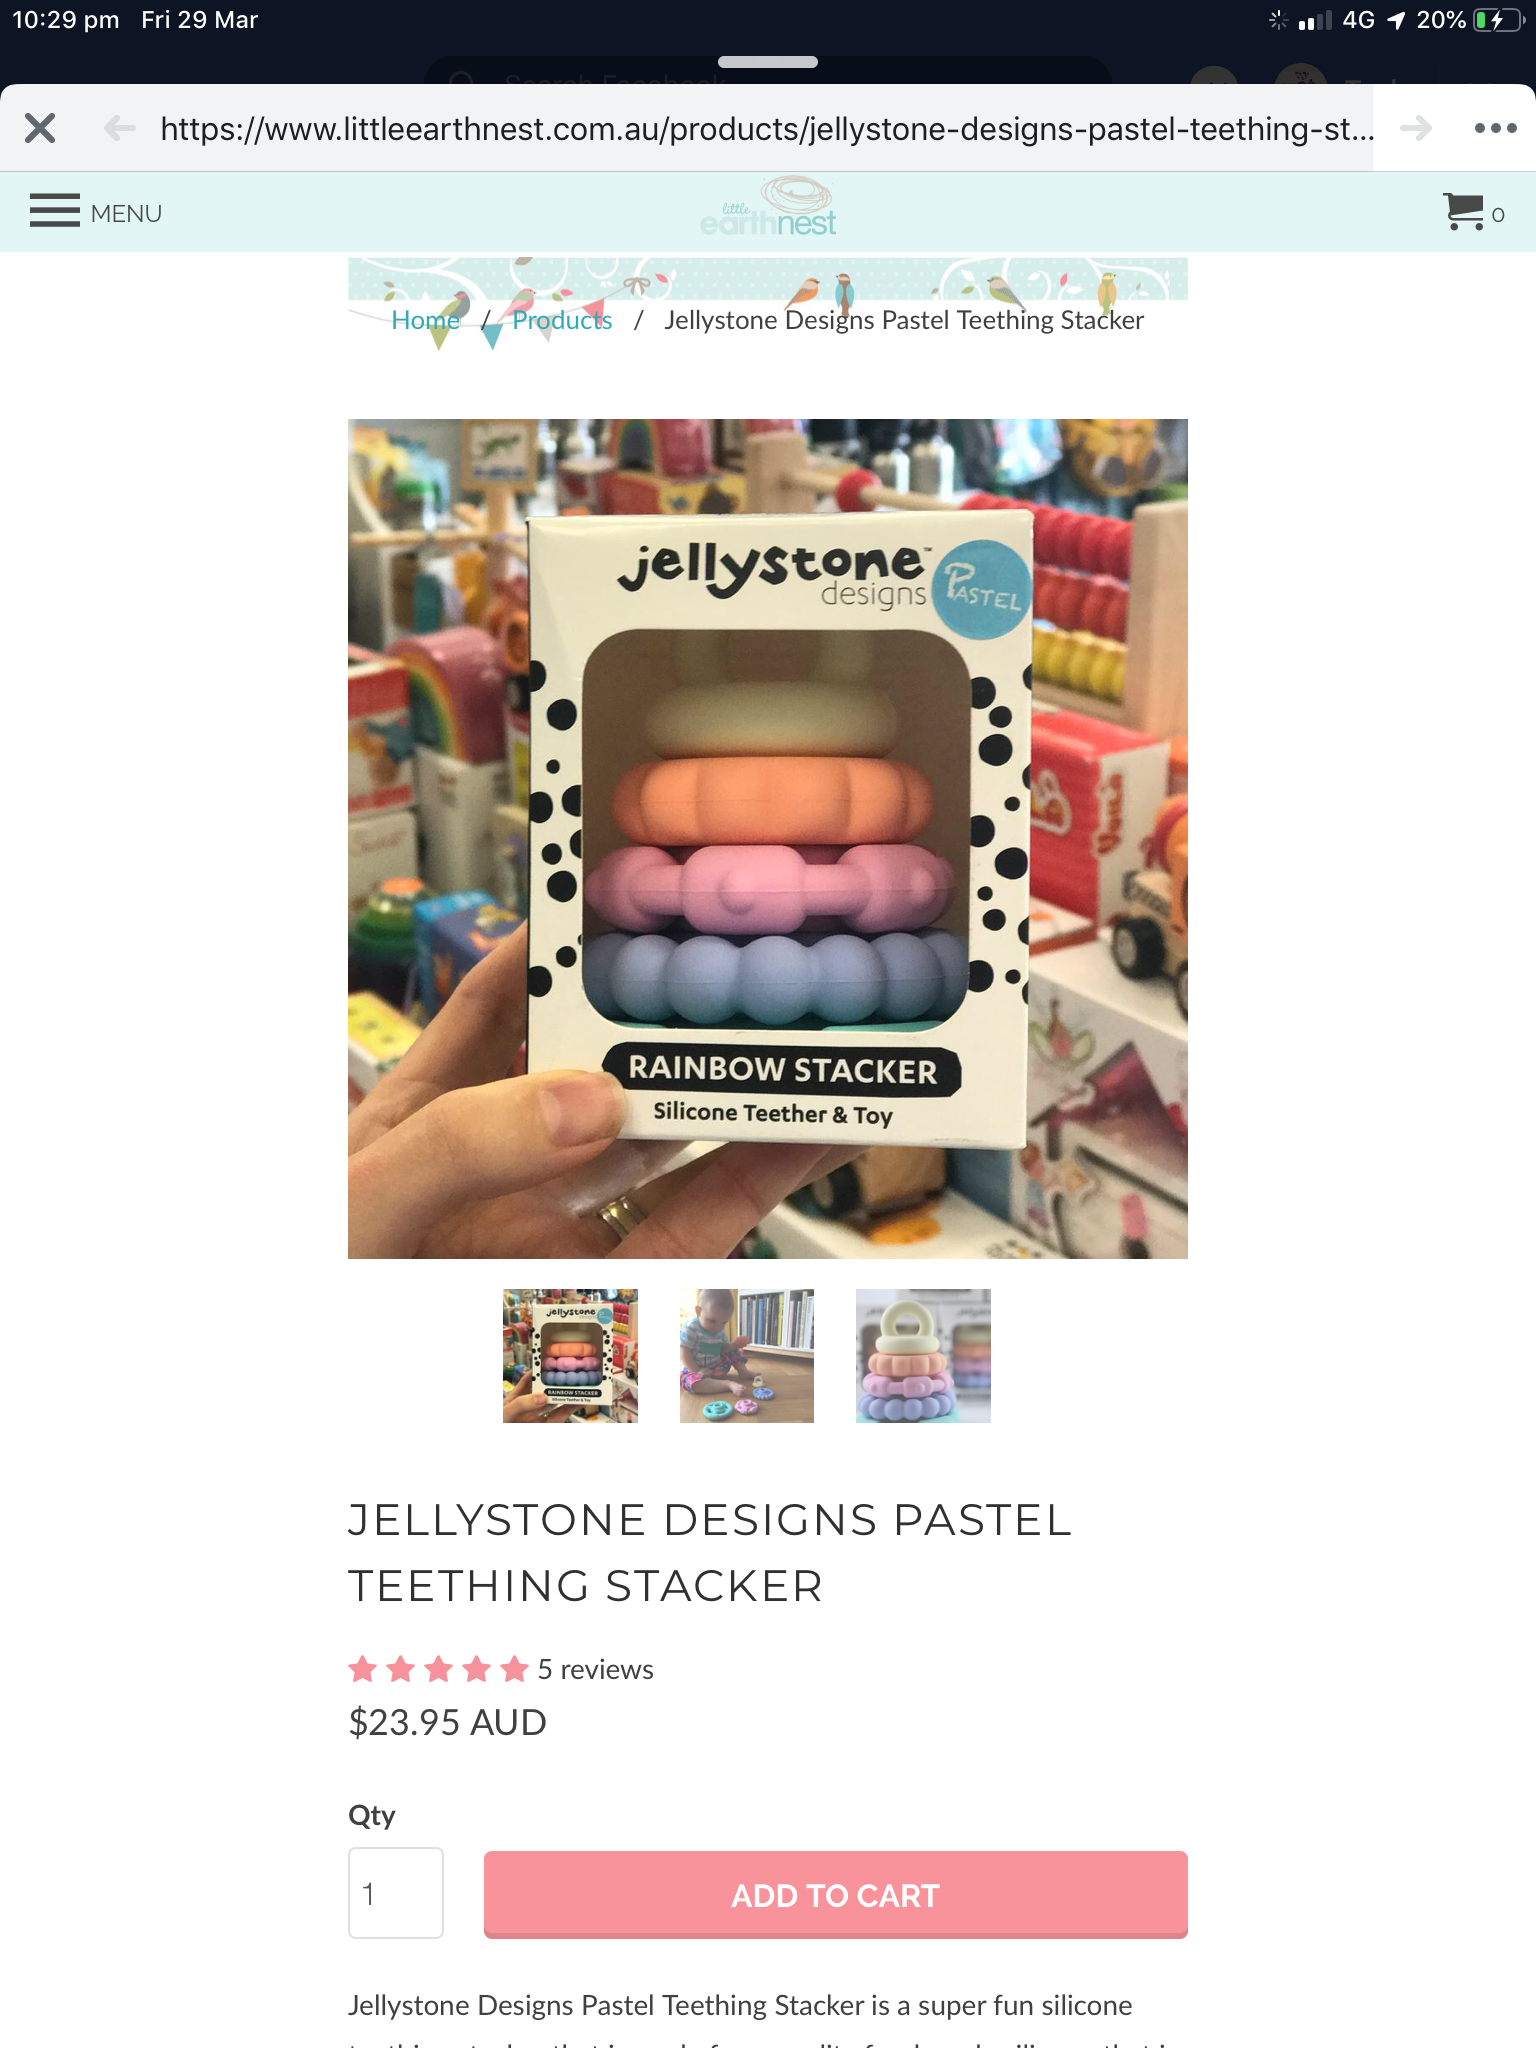 Jelly stone tethers -pastel